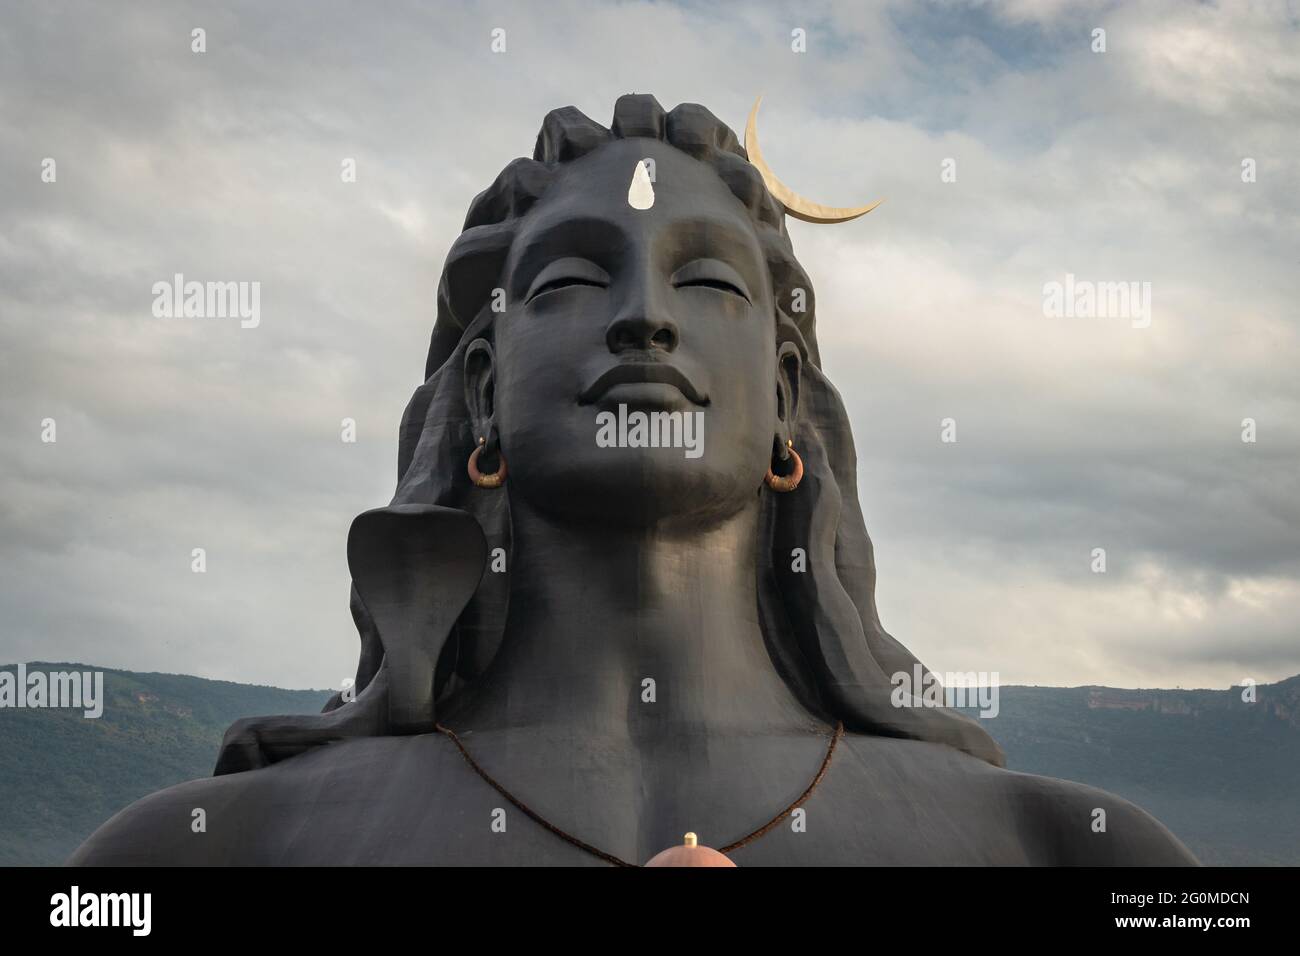 adiyogi shiva statue from unique different perspectives image is ...